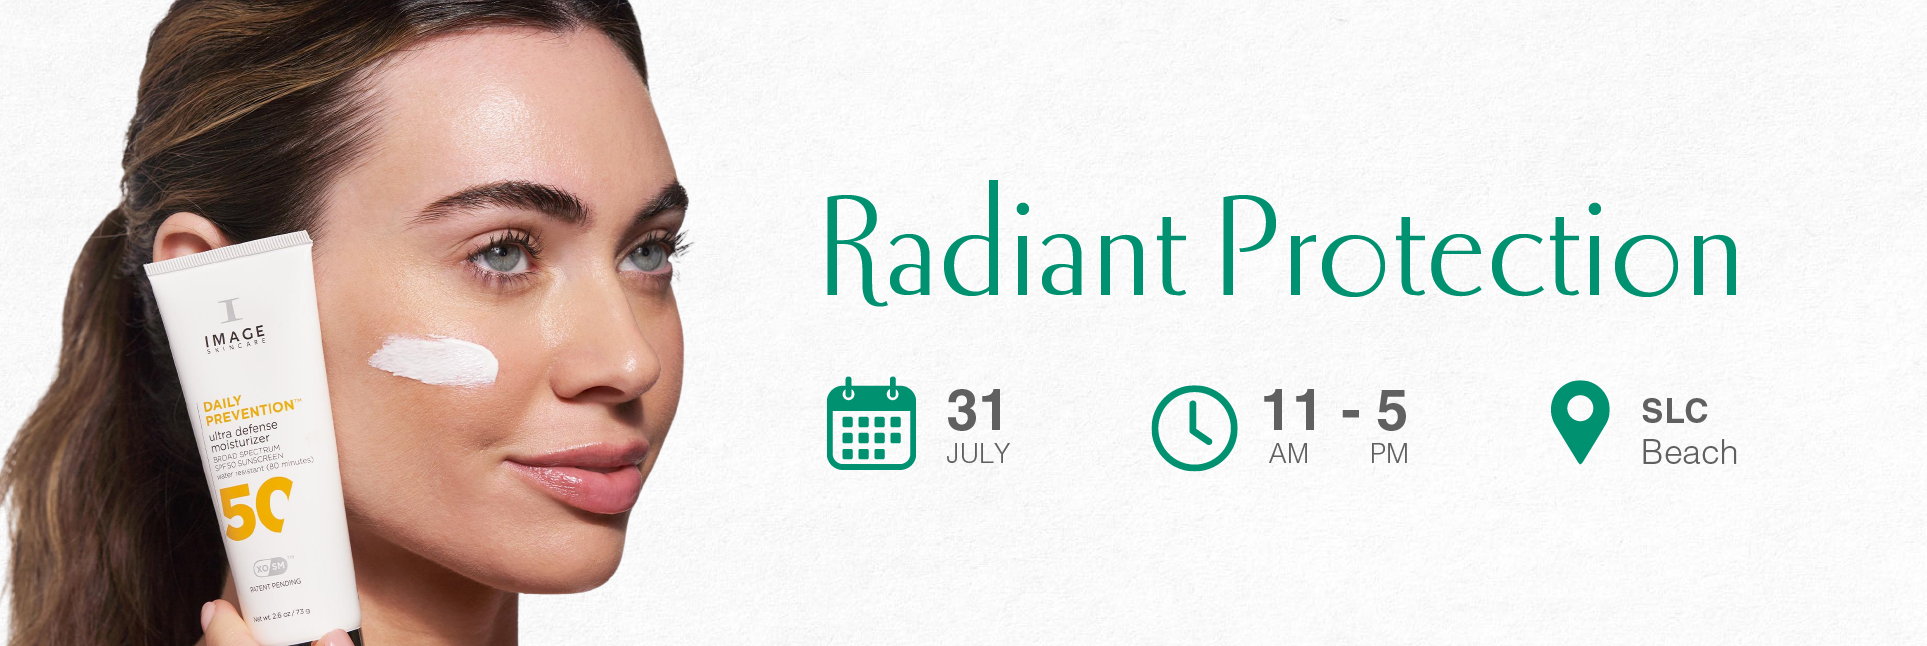 Radiant-Protection